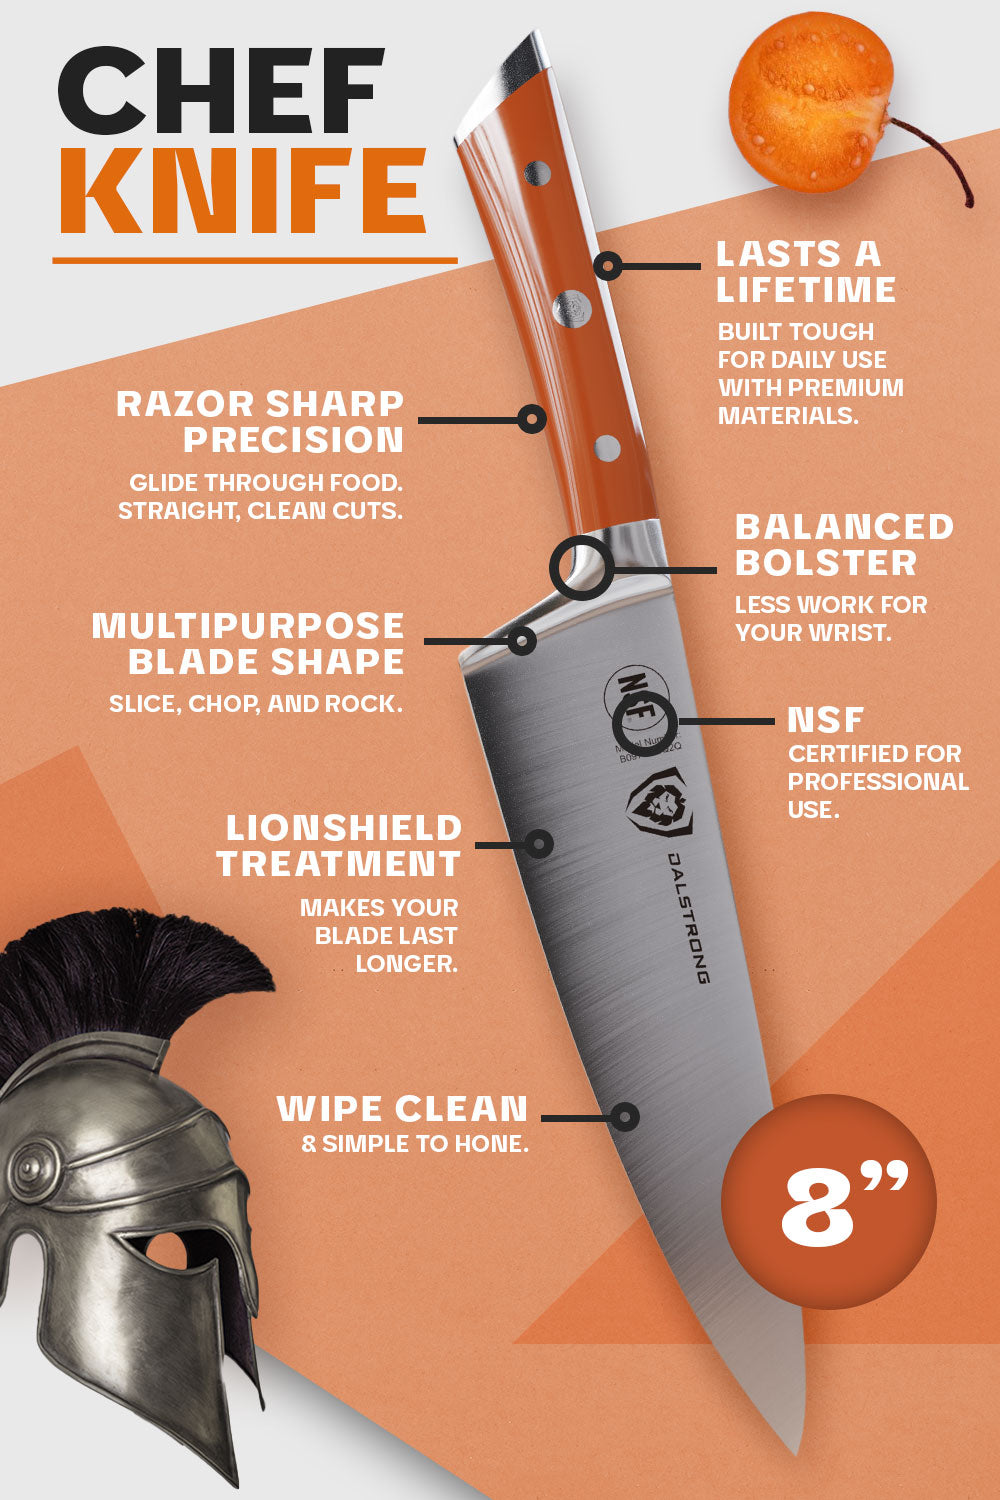 Dalstrong gladiator series 8 inch chef knife with orange handle specification.